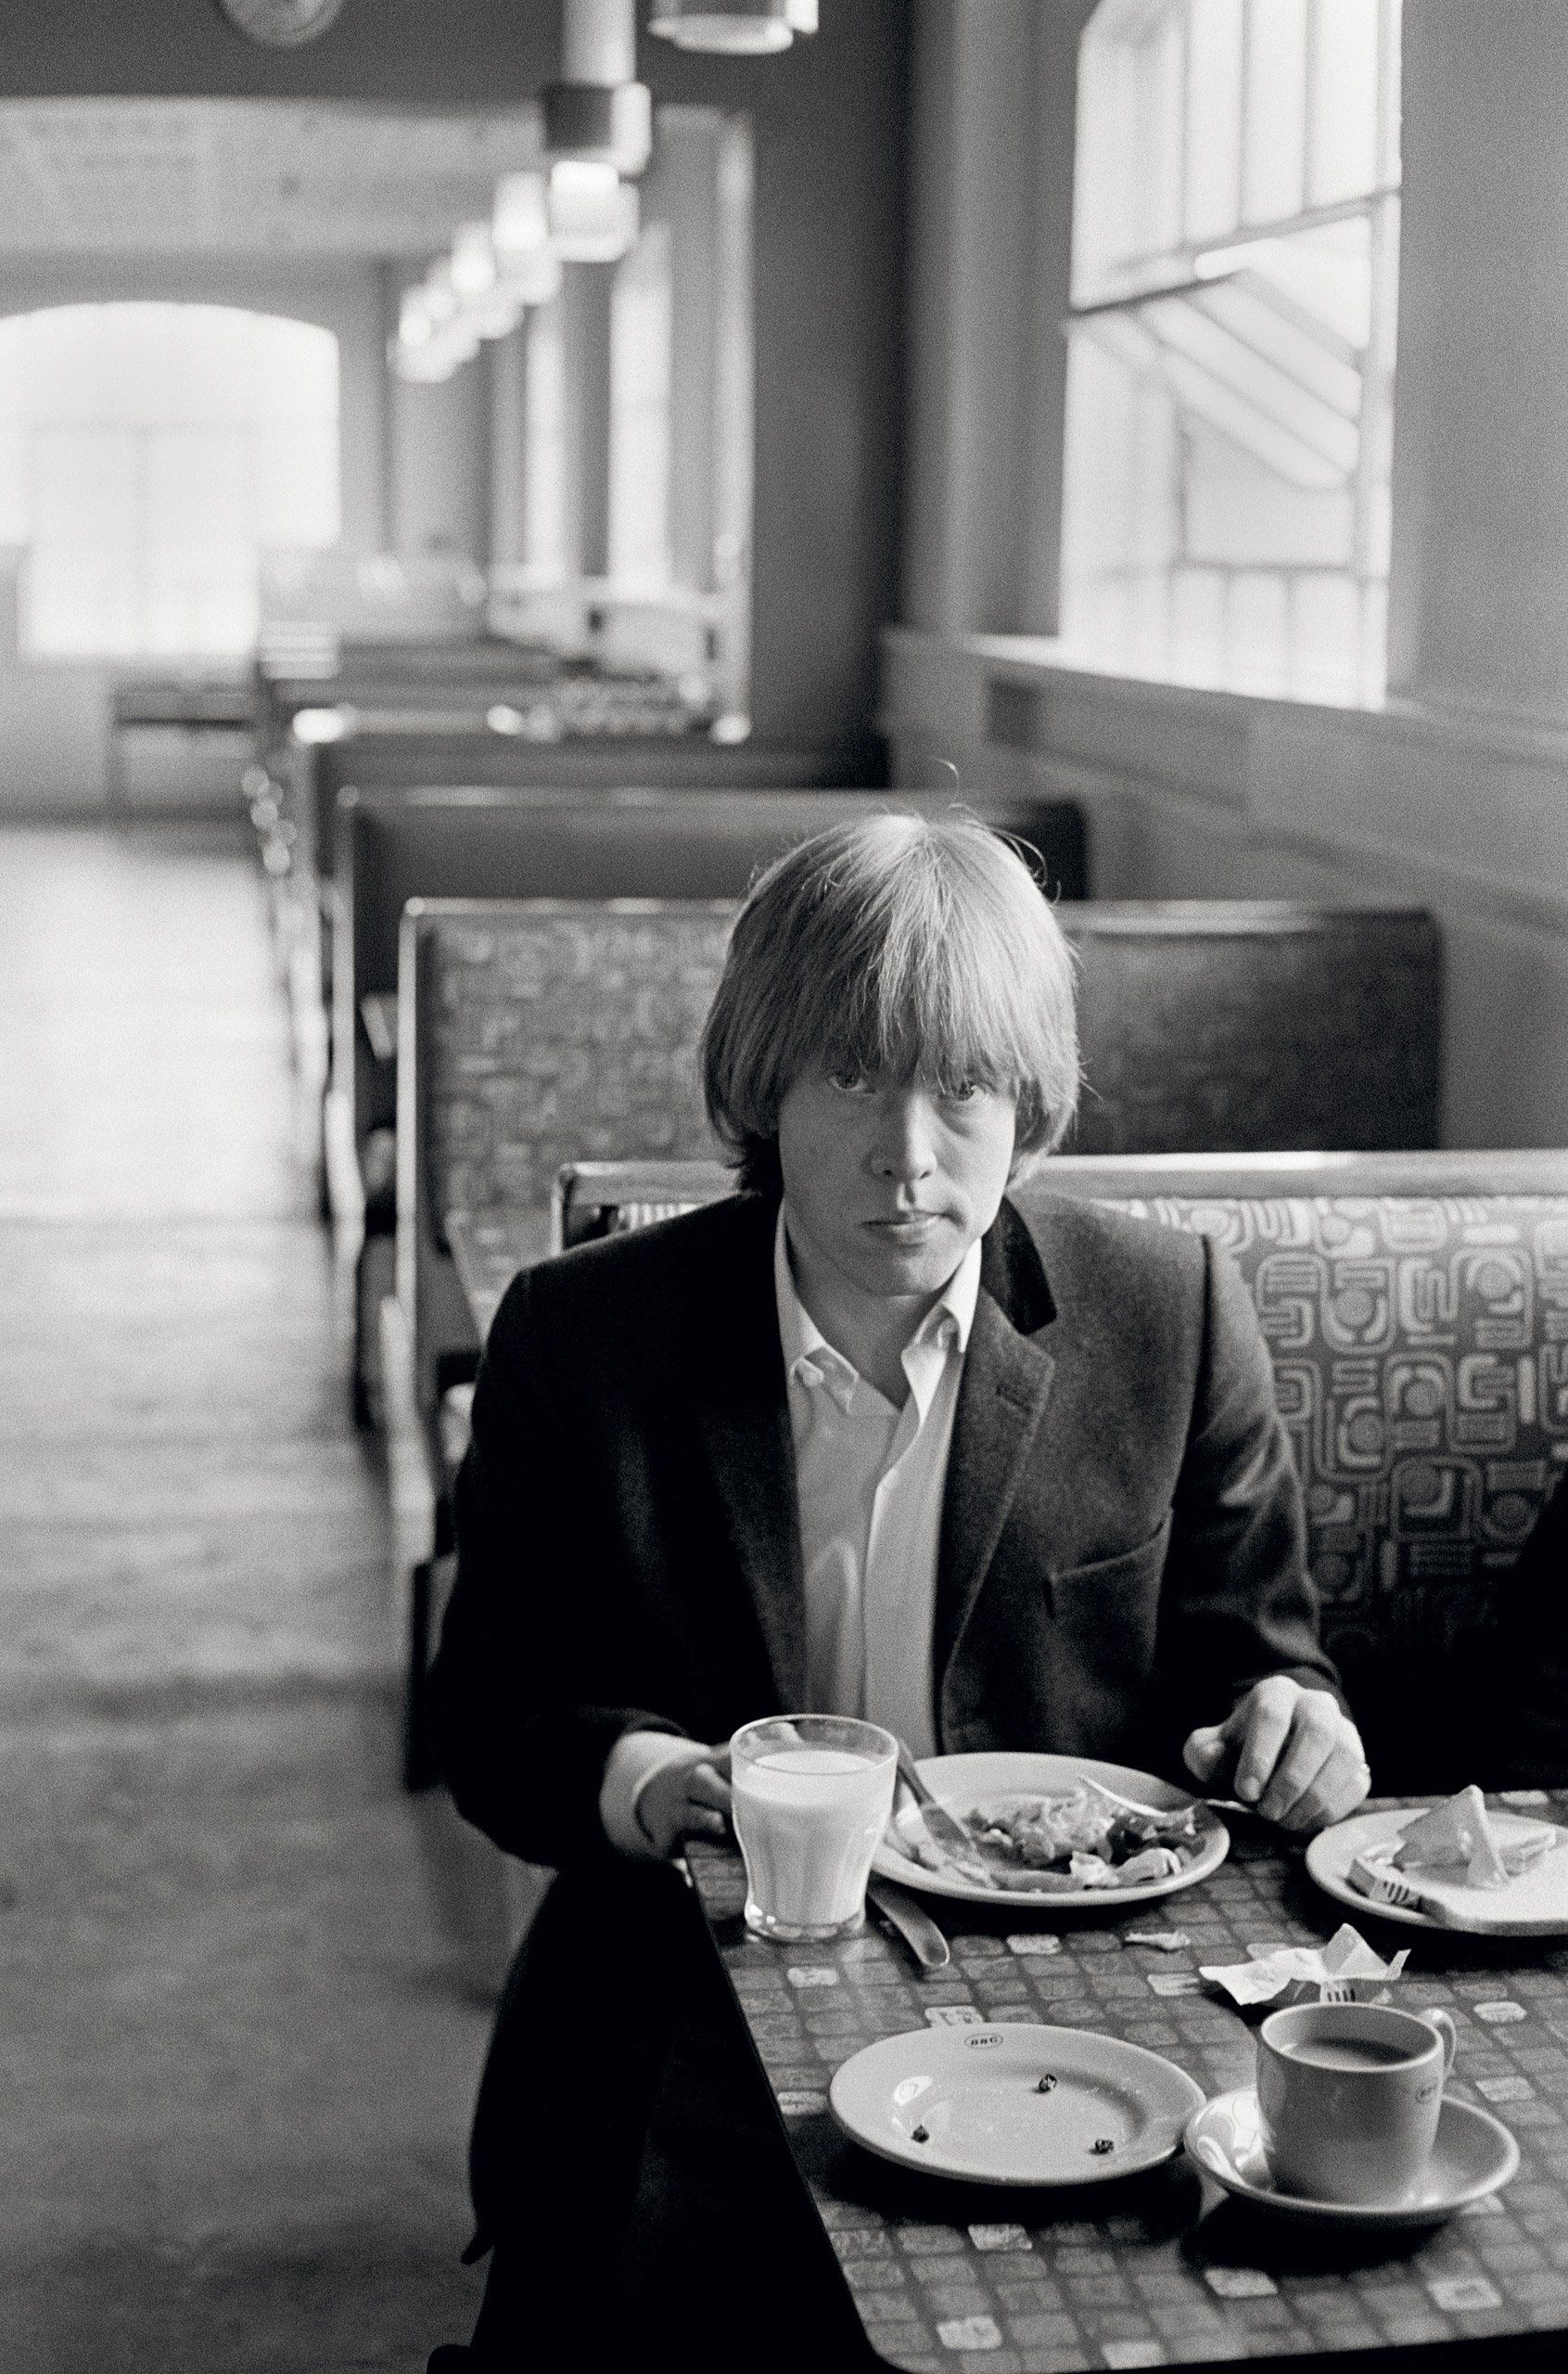 Guitarist Brian Jones of the Rolling Stones has a glass of milk in a motorway cafe, 1964.